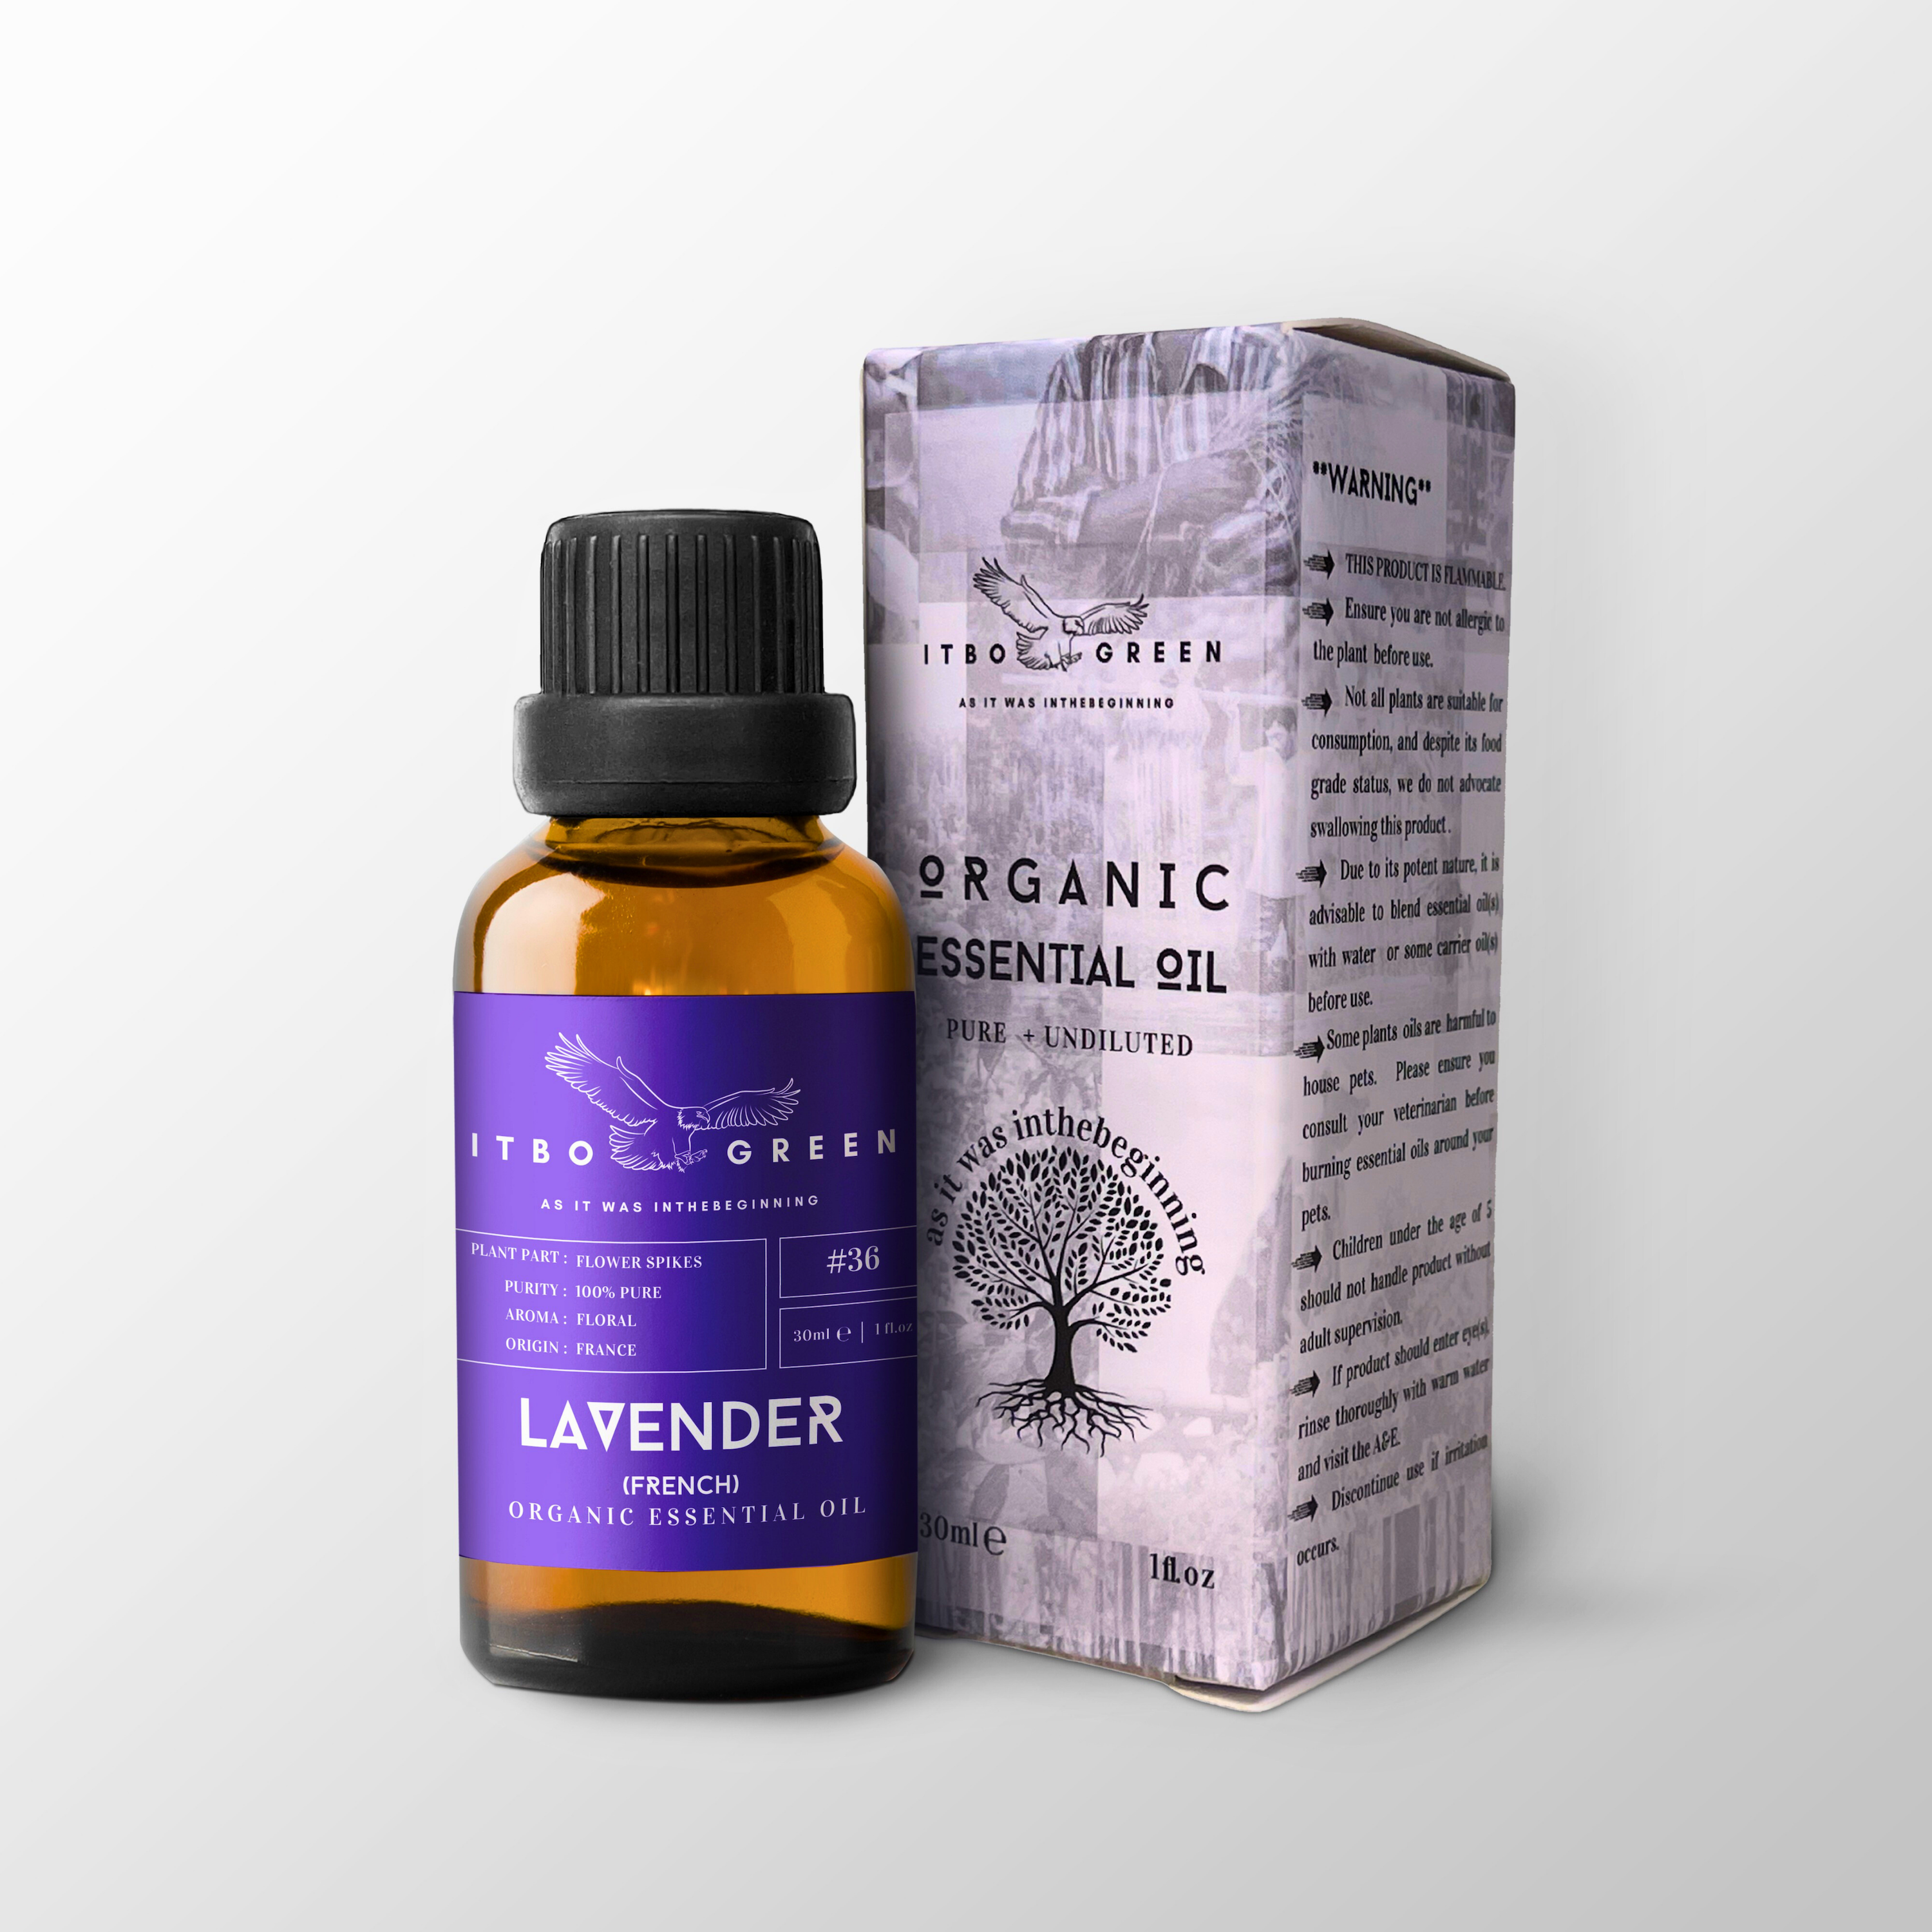 Organic Lavender (French) Essential Oil